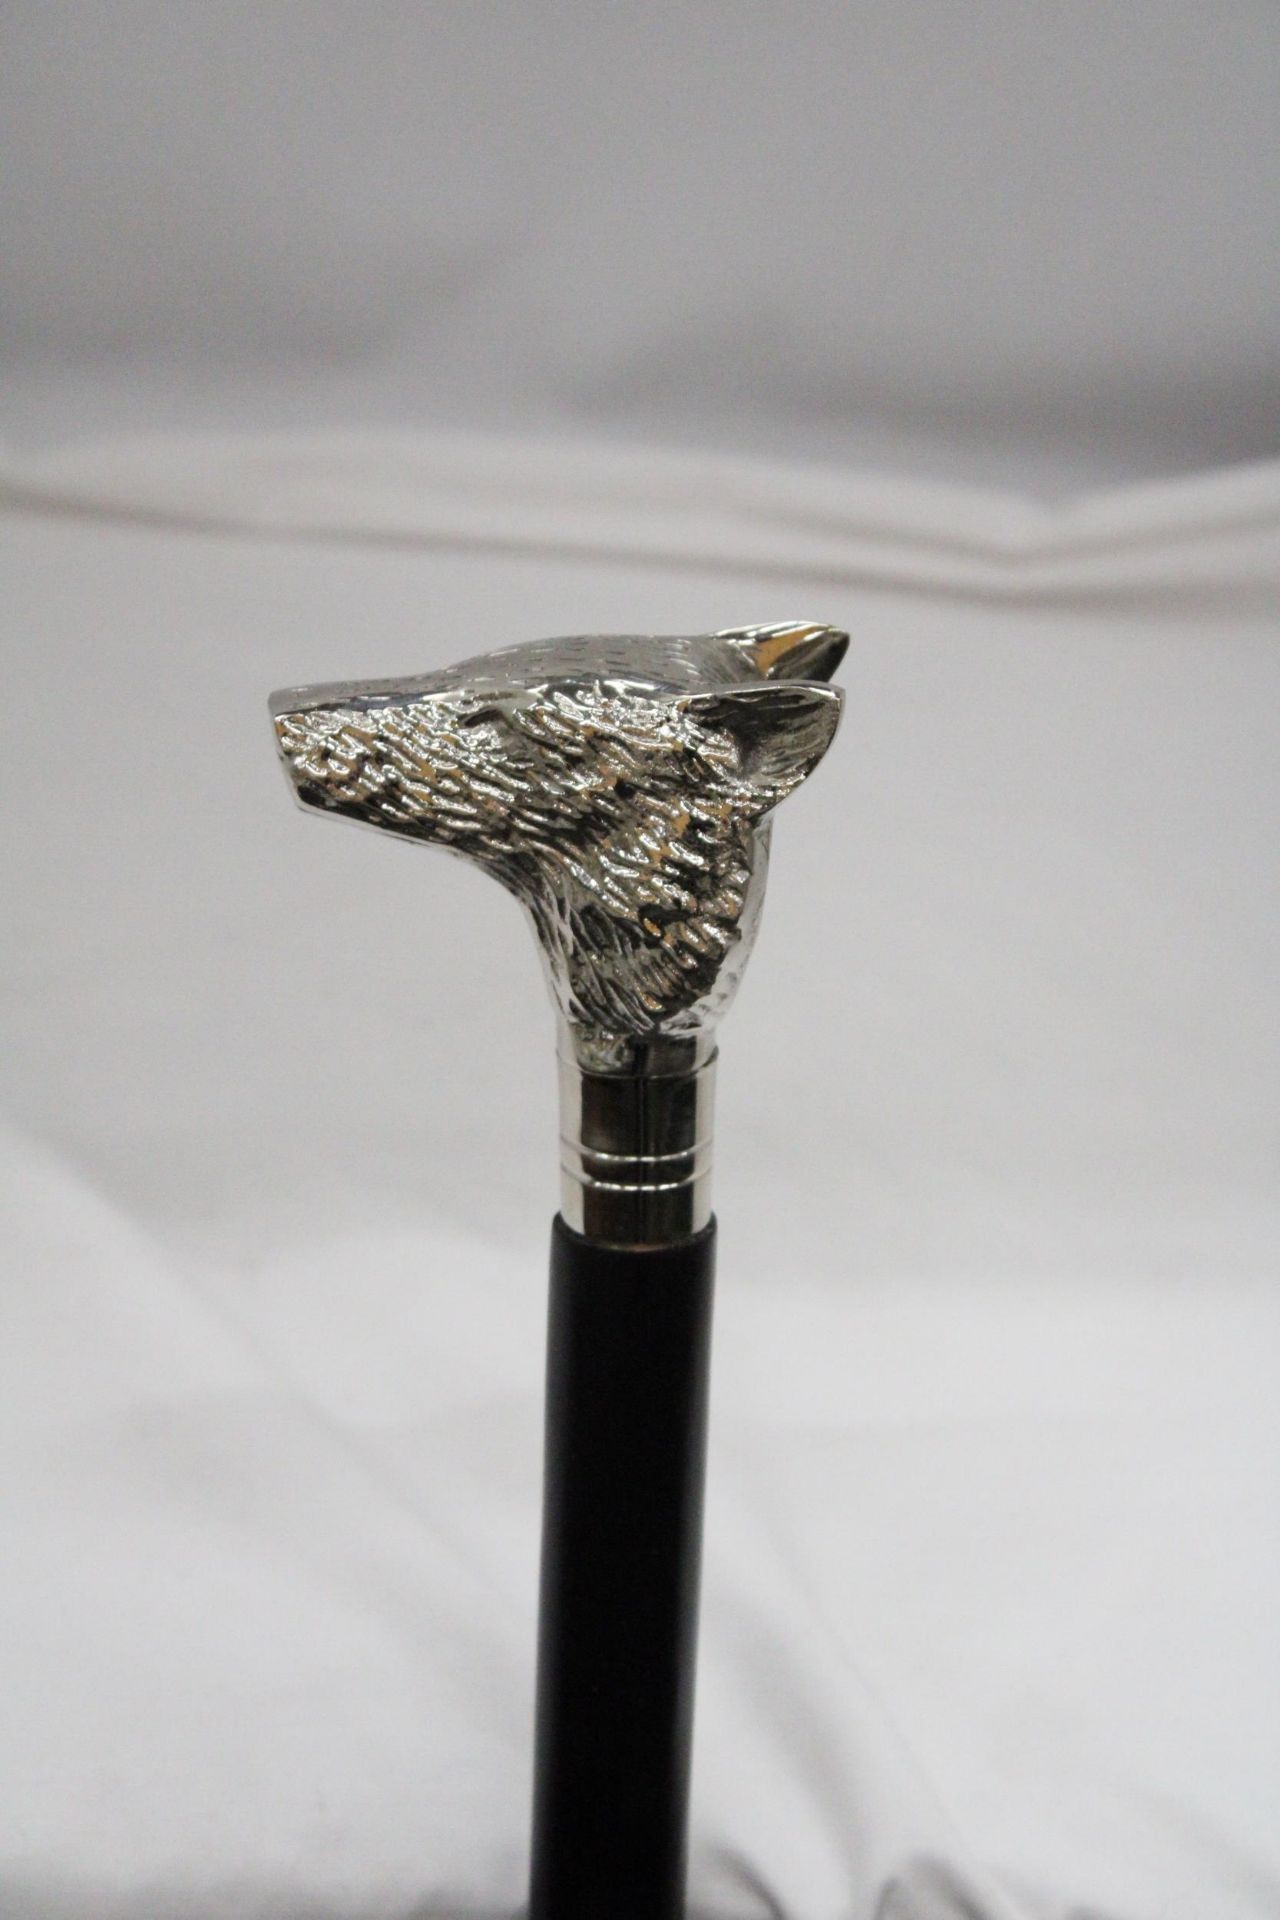 A WALKING STICK WITH A CHROME WOLF HANDLE - Image 2 of 6